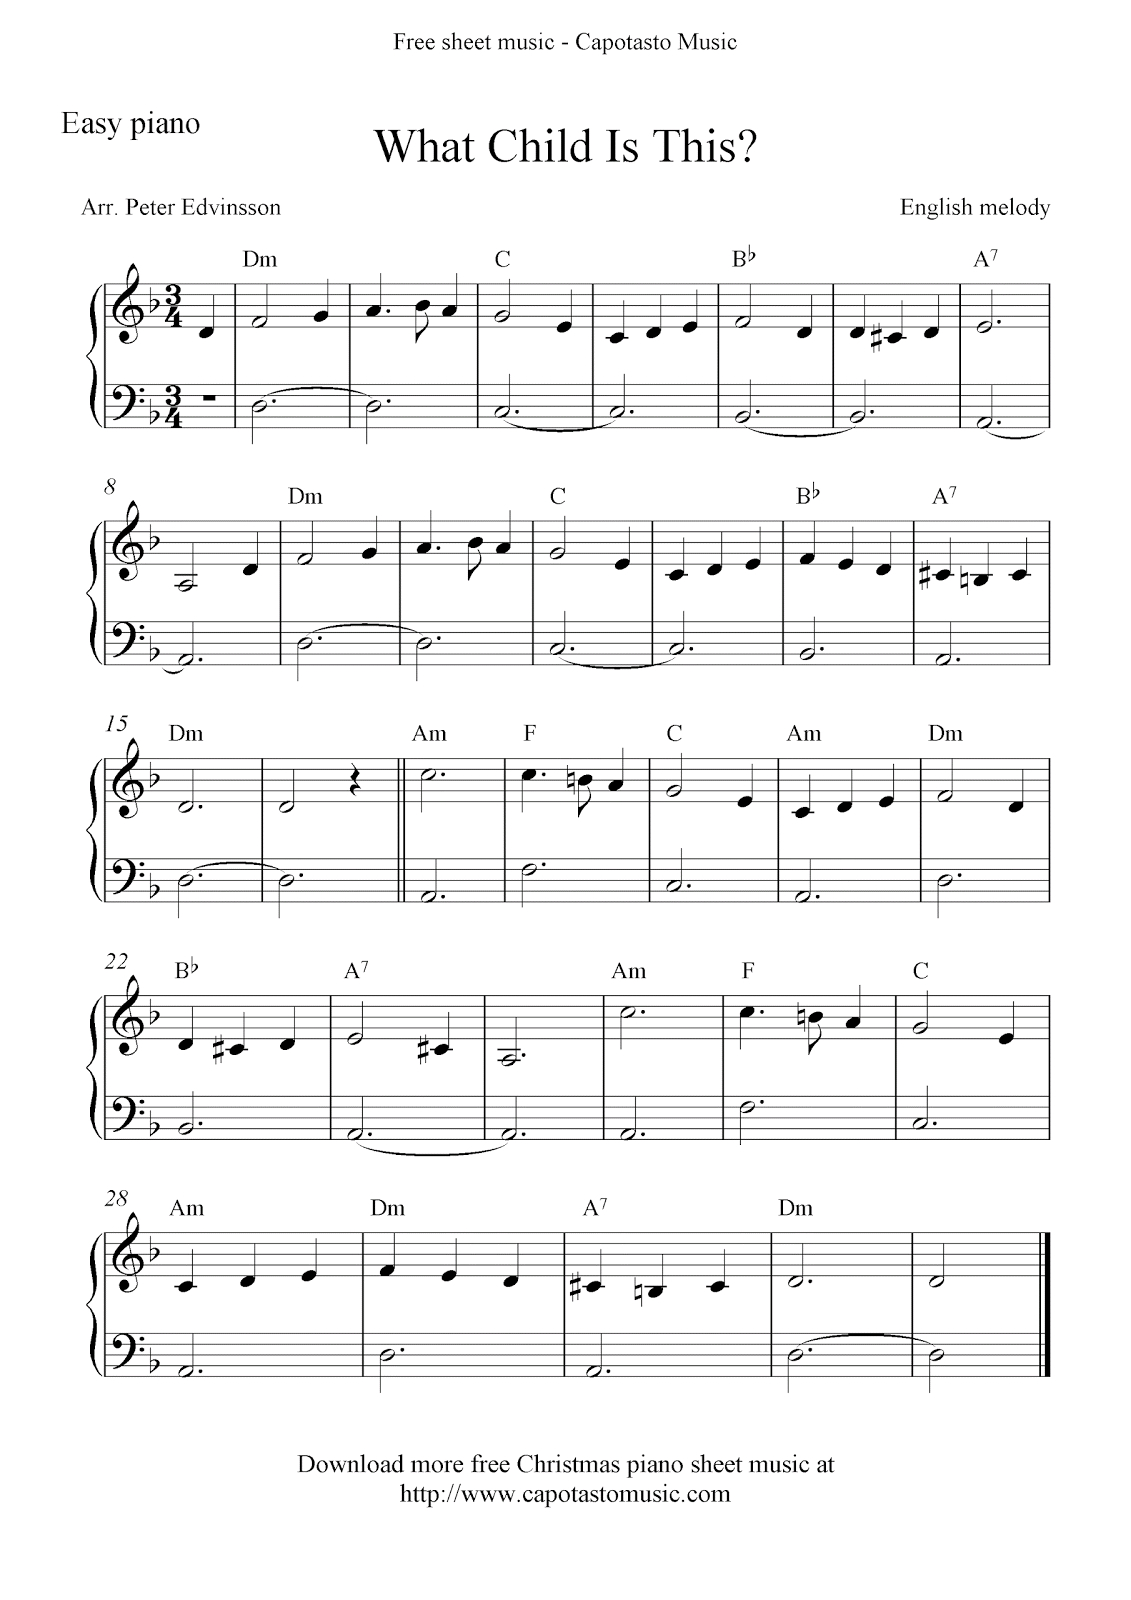 Easy Piano Solo Arrangementpeter Edvinsson Of The Christmas - Christmas Piano Sheet Music Easy Free Printable